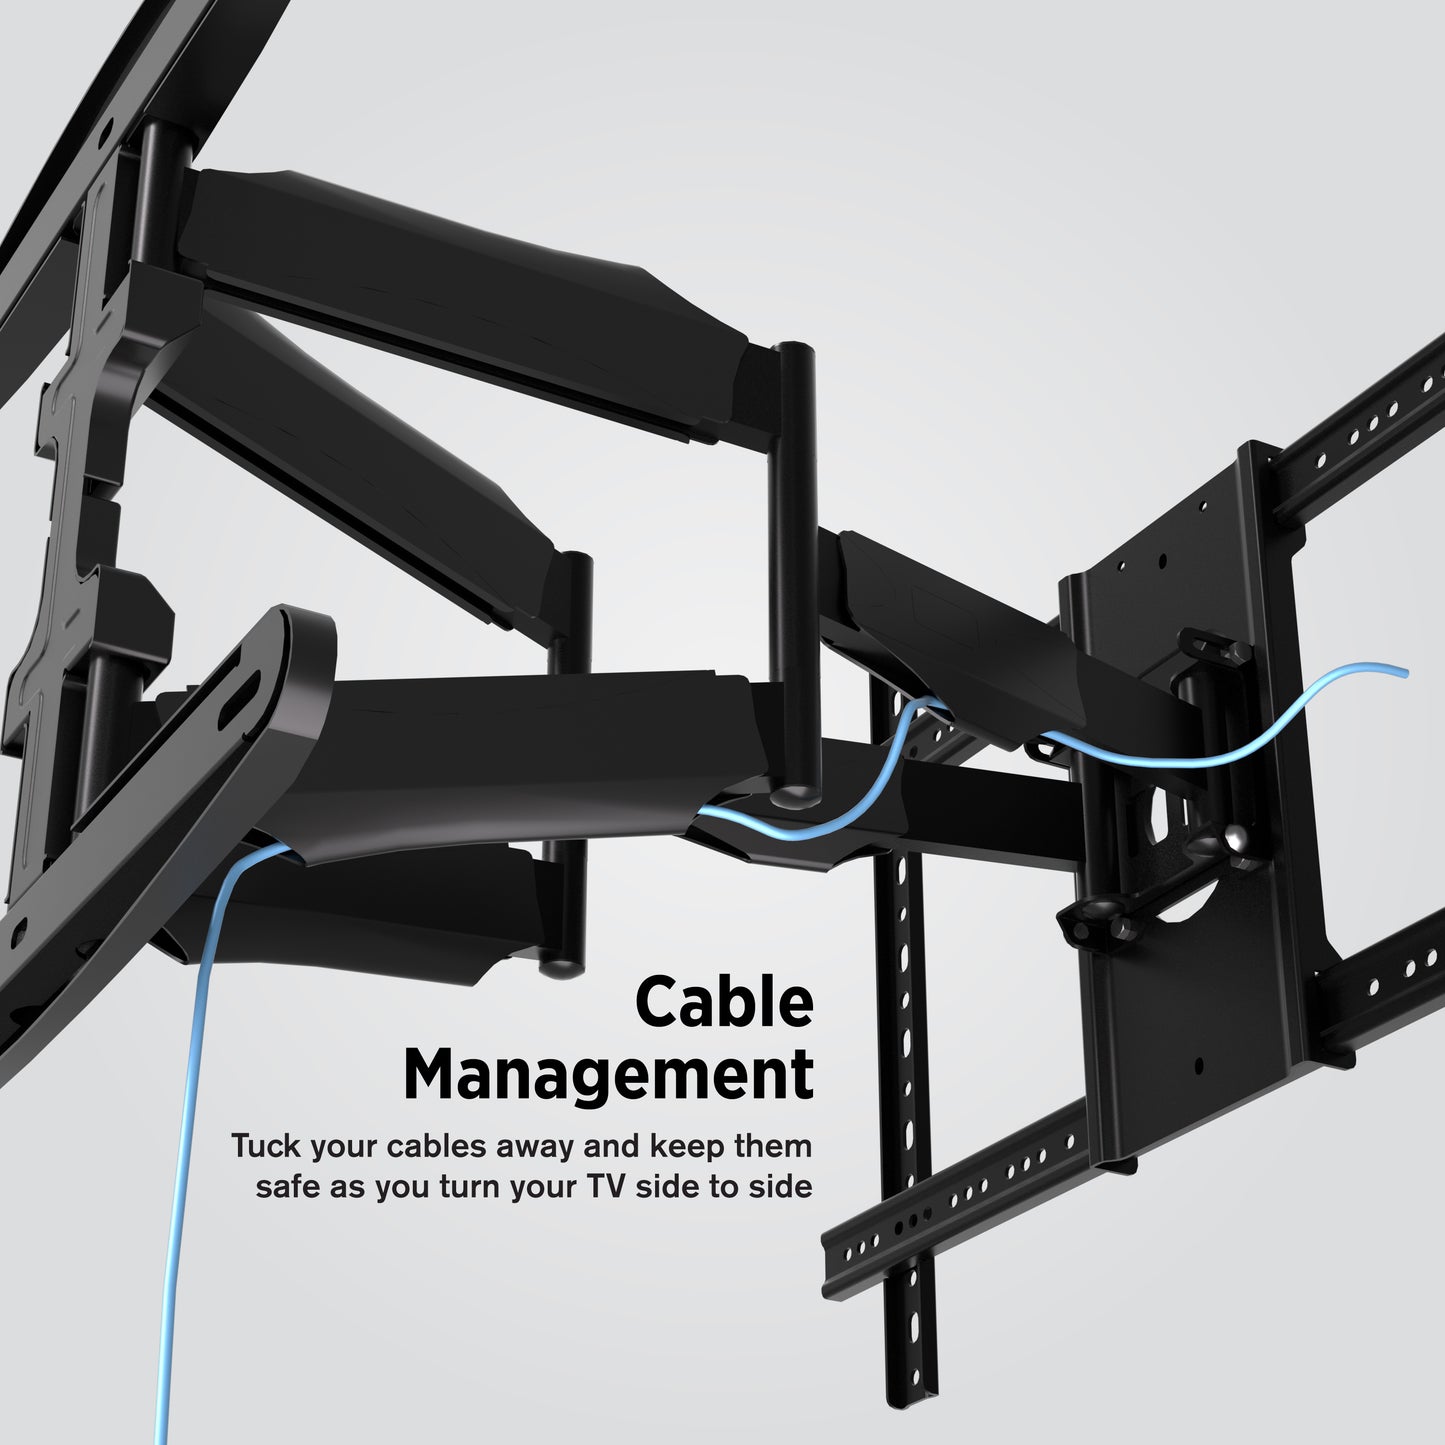 ProMounts Full Motion / Articulating TV Wall Mount for 42" to 85" TVs Holds Up to 100lbs (MA641)